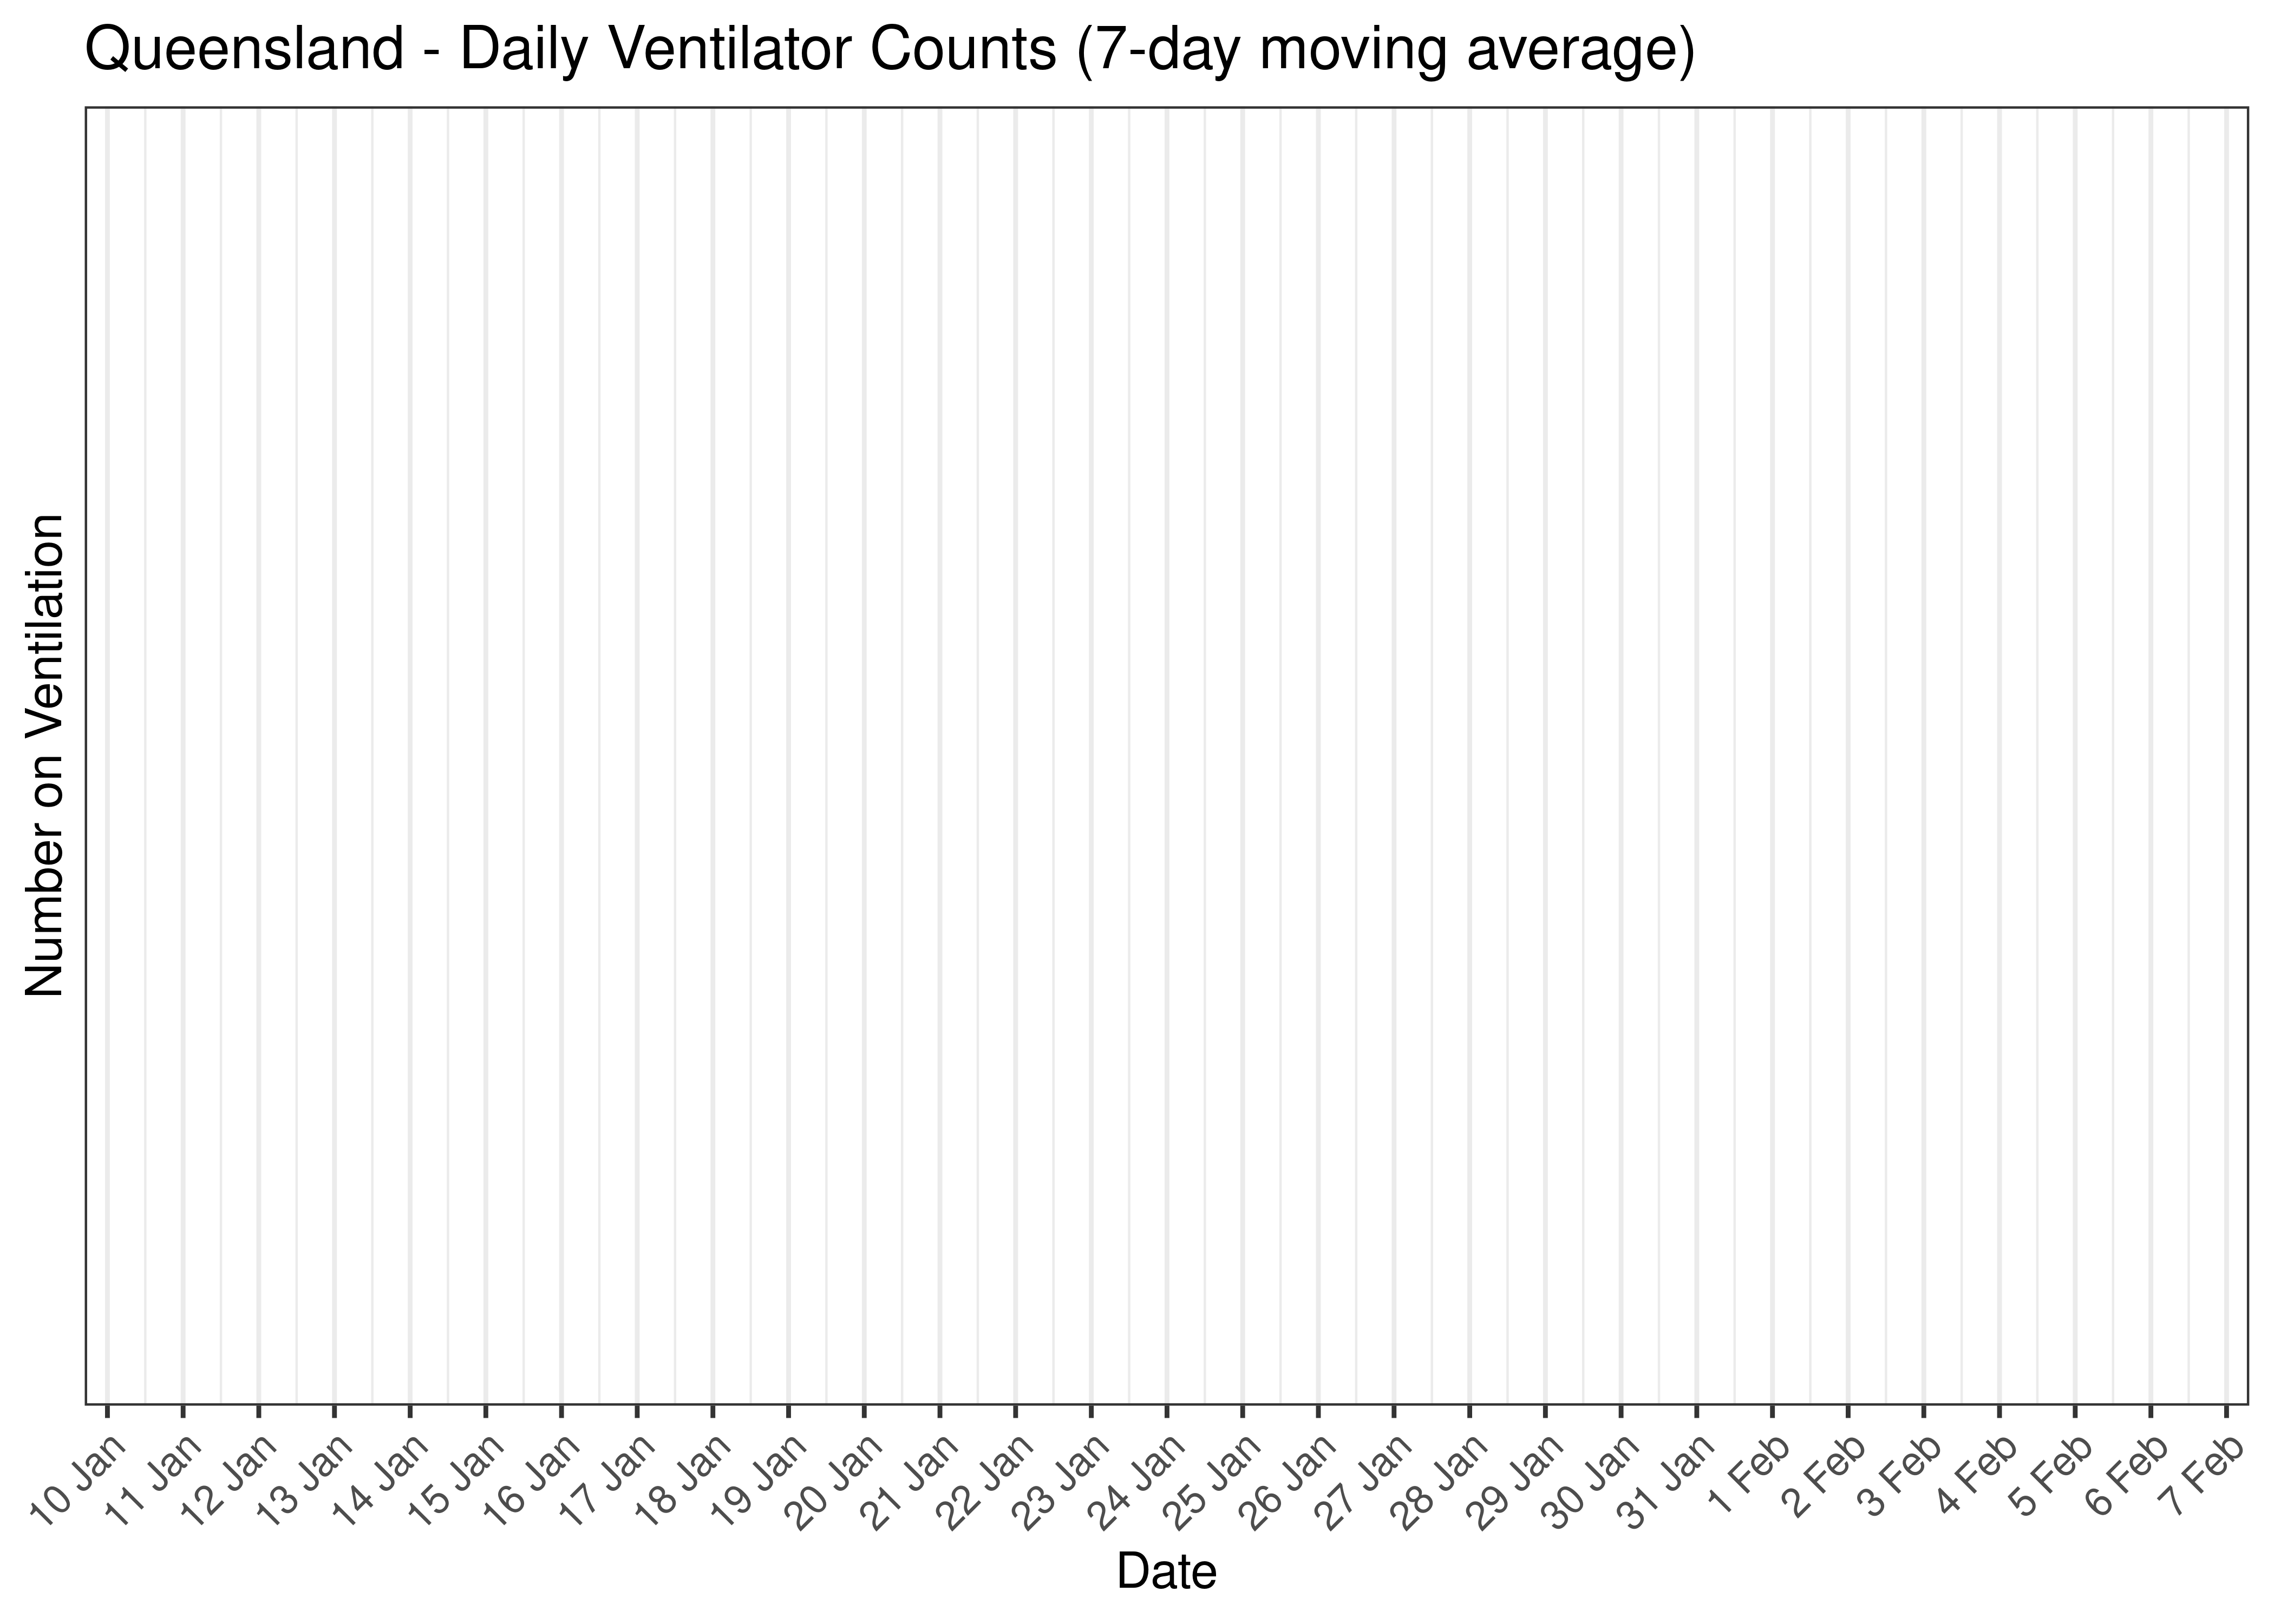 Queensland - Daily Ventilator Counts for Last 30-days (7-day moving average)